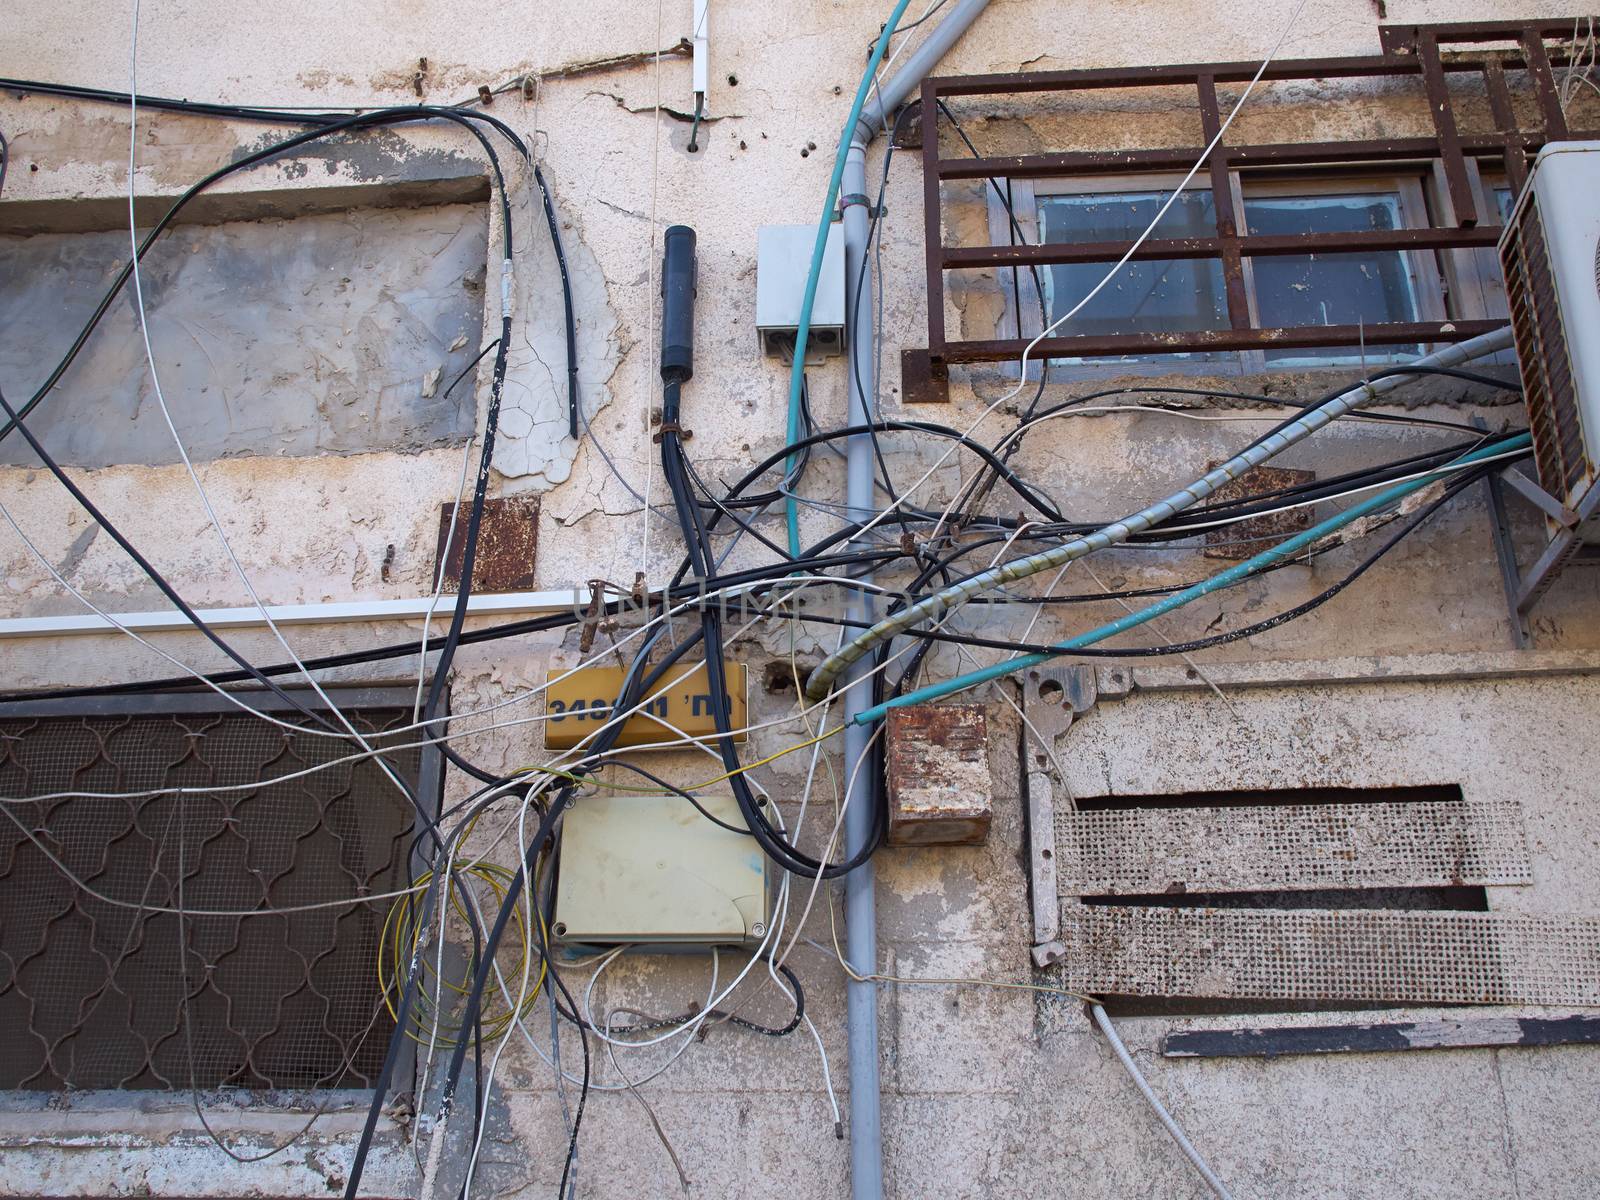 Tangled electric cable mess on a wall of building